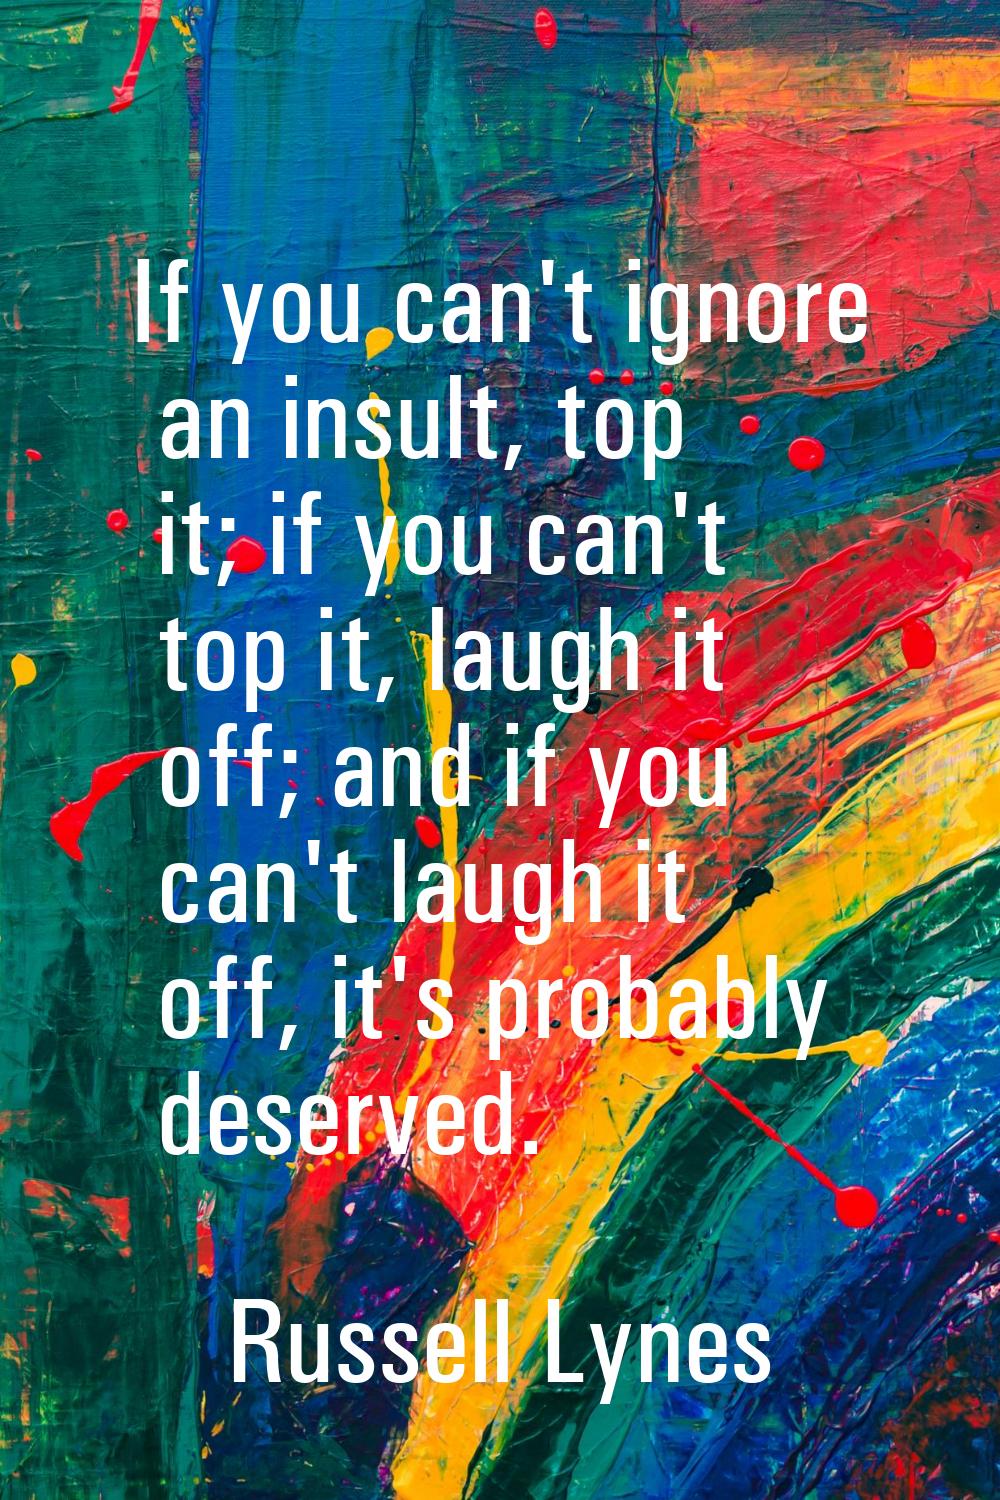 If you can't ignore an insult, top it; if you can't top it, laugh it off; and if you can't laugh it